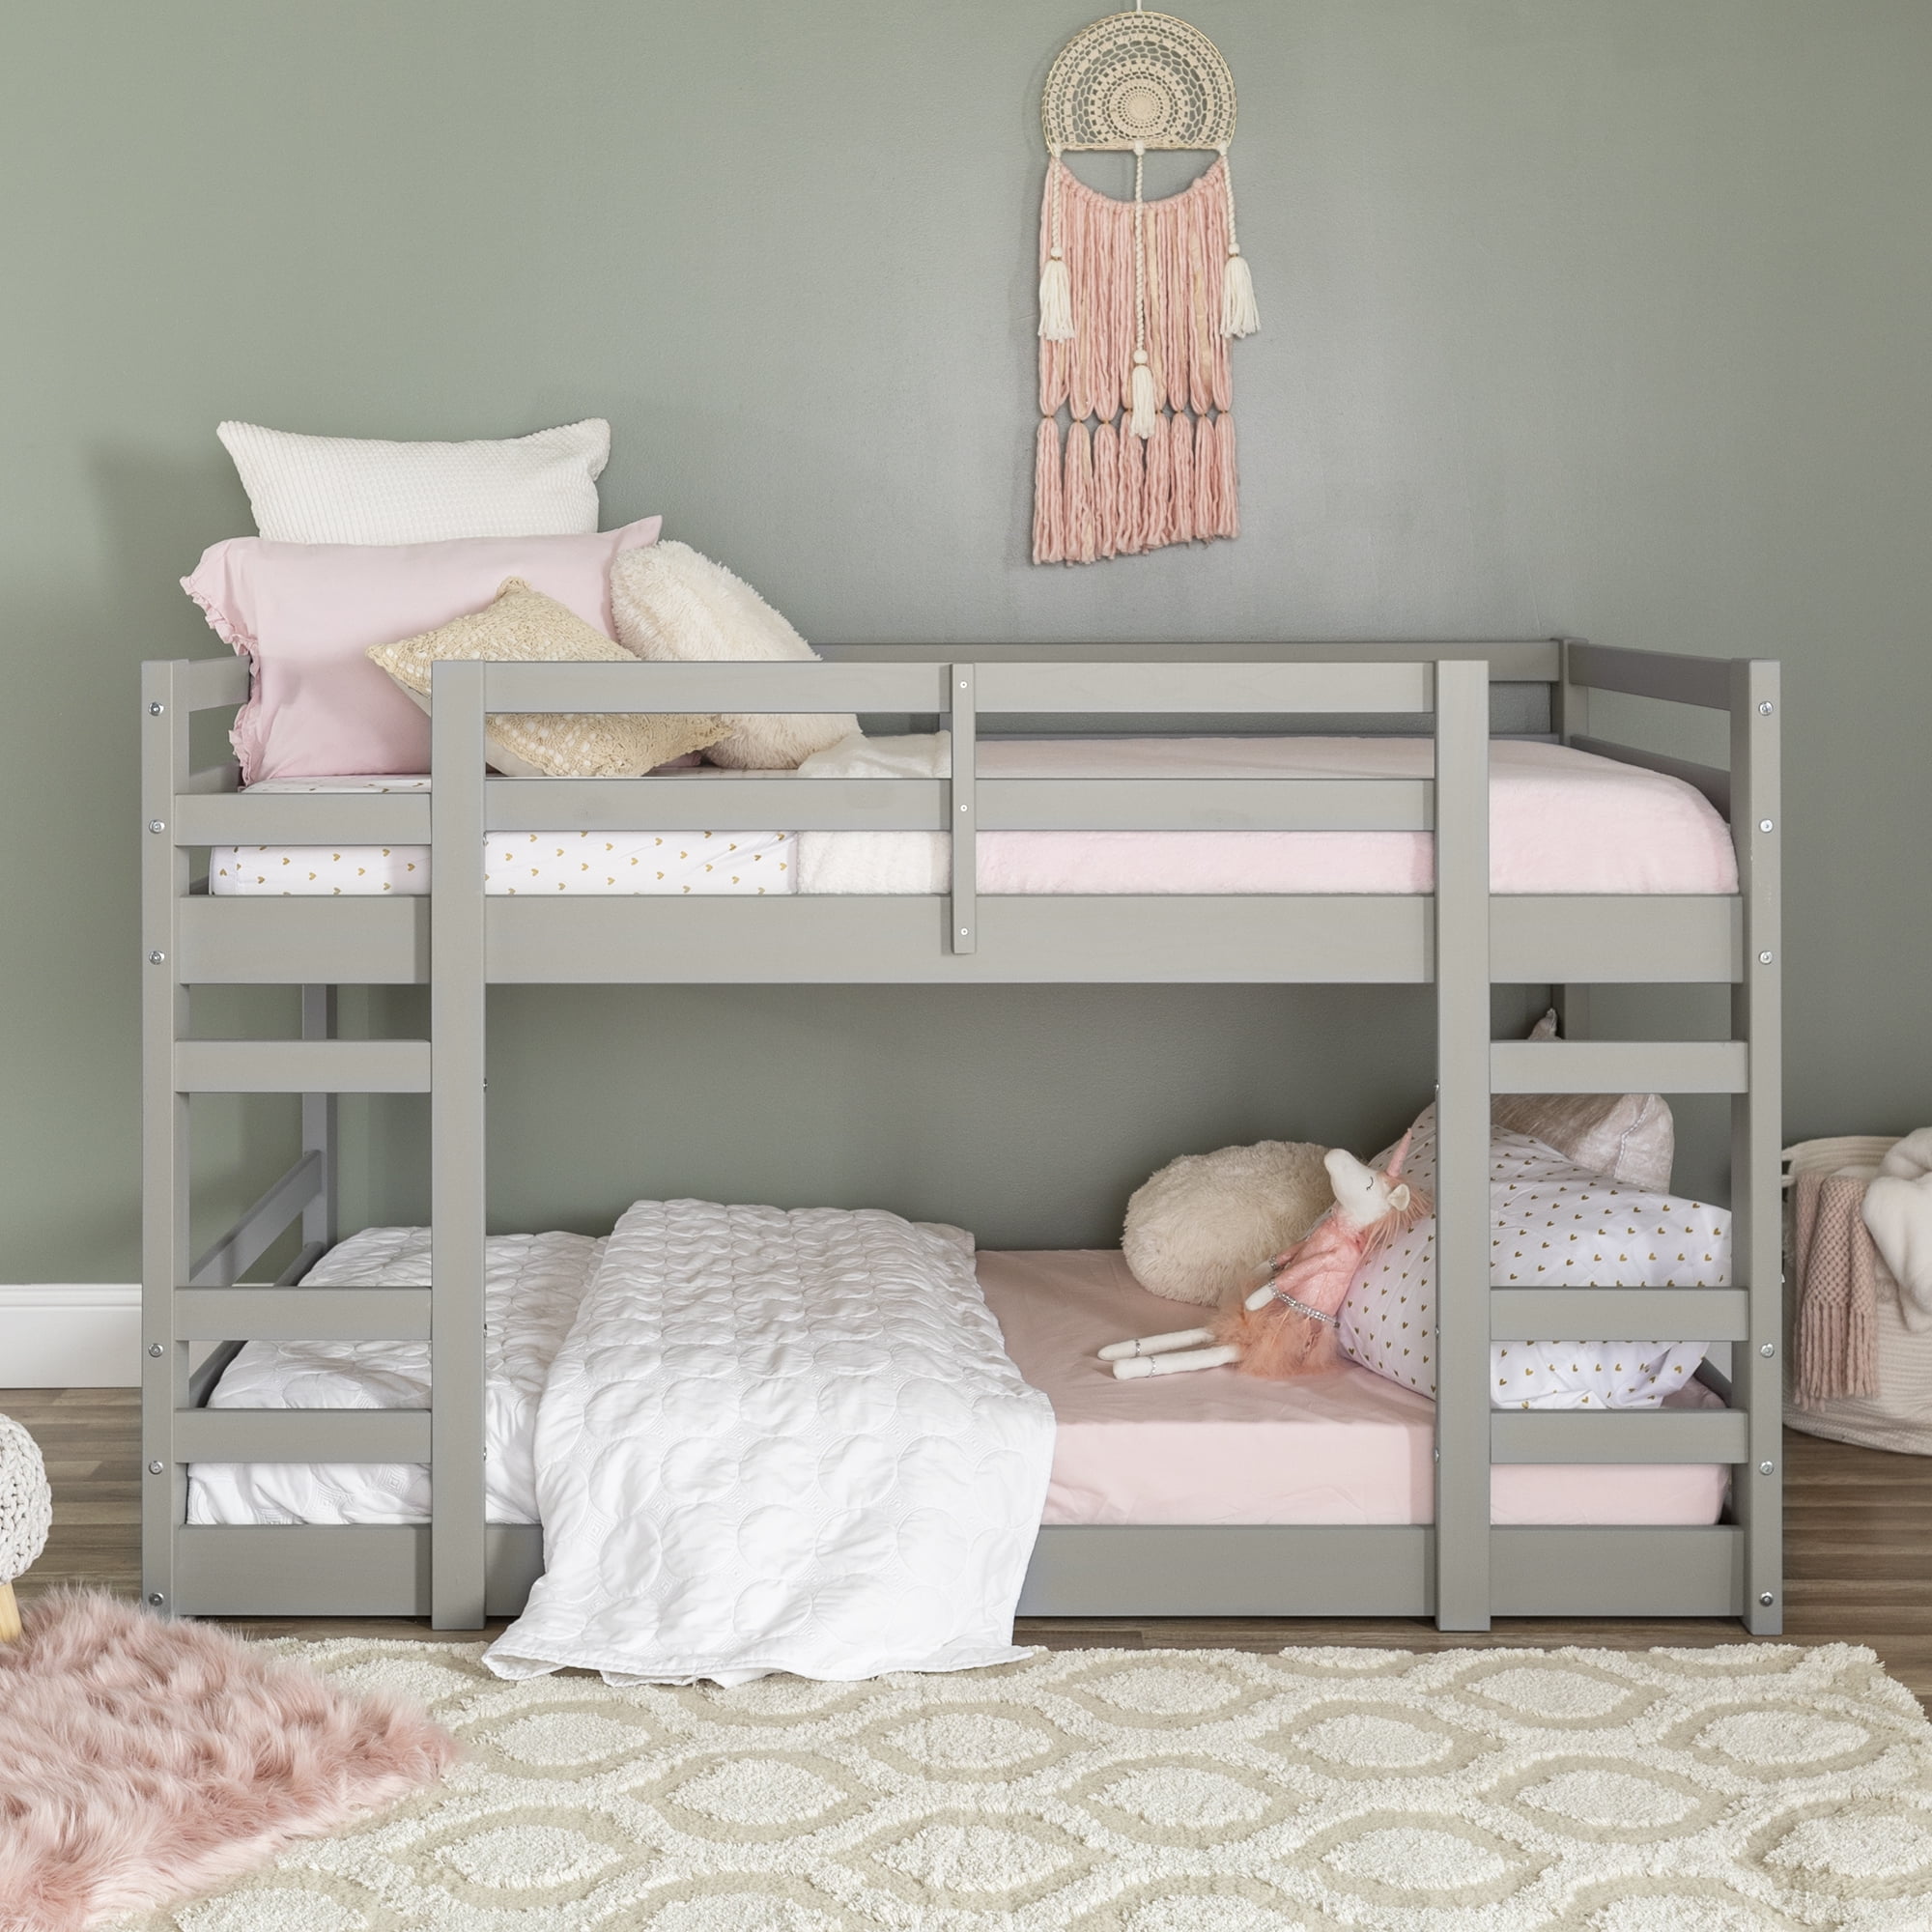 Manor Park Solid Wood Twin Over, Solid Oak Bunk Beds Twin Over Twin